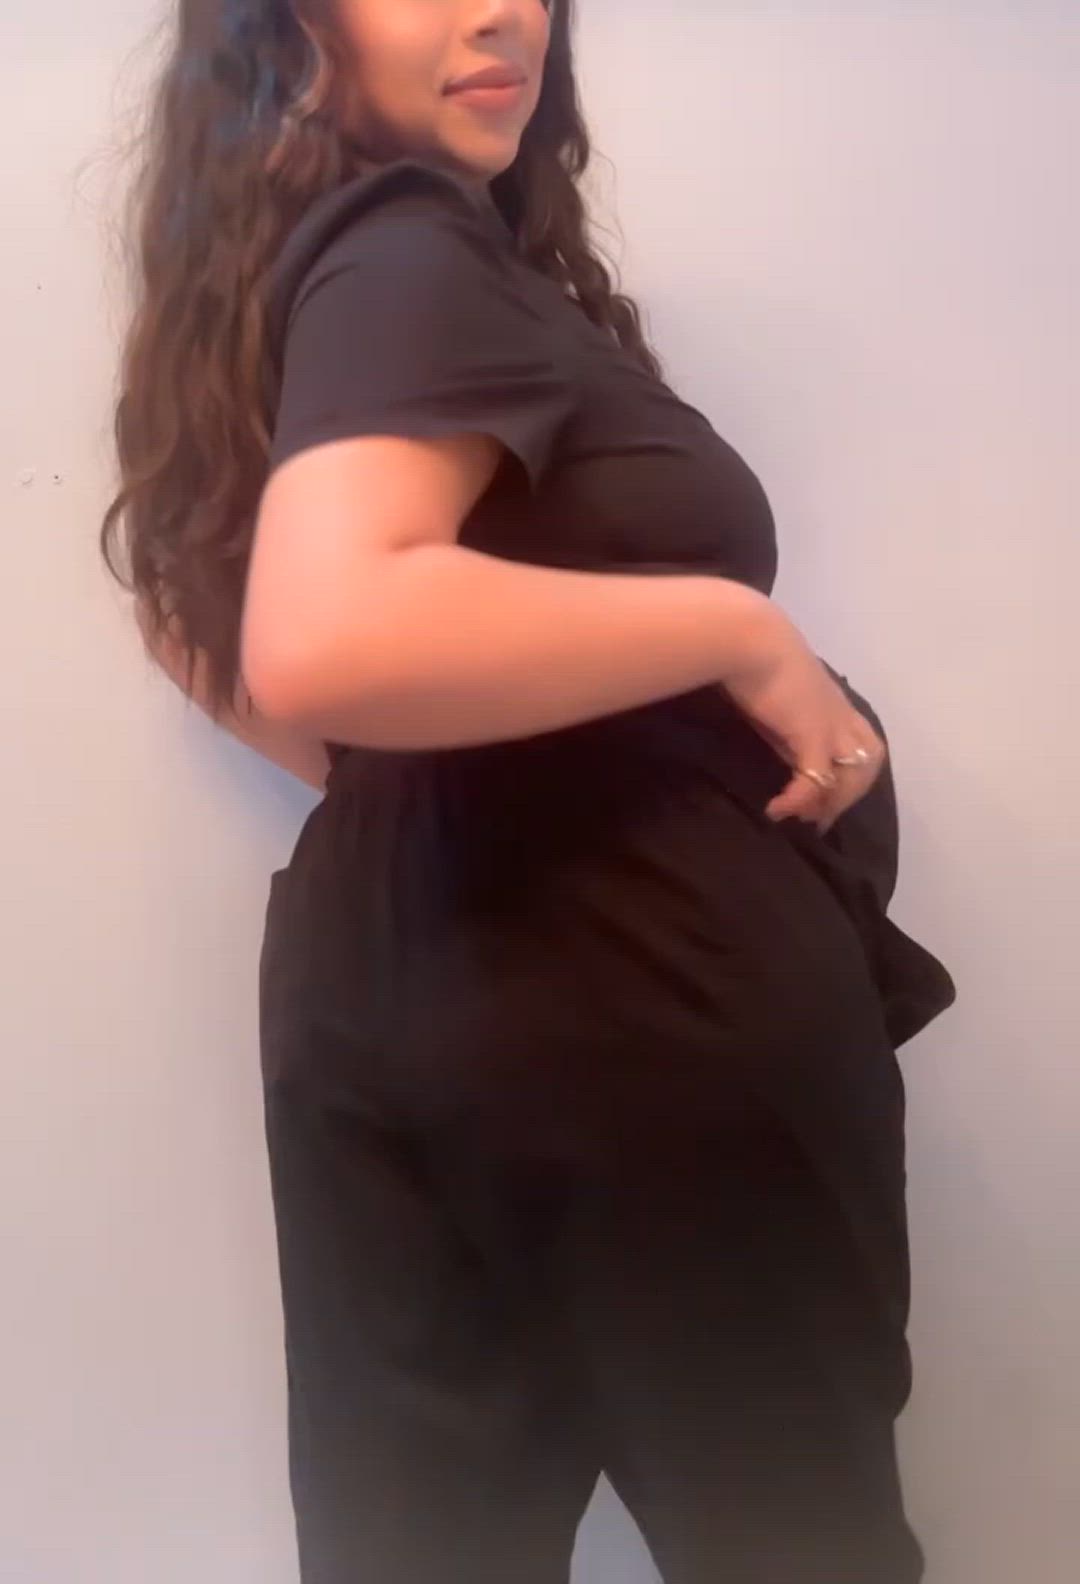 Ass porn video with onlyfans model ashleyyybabyxoxox <strong>@ashleyyybabyxoxox</strong>